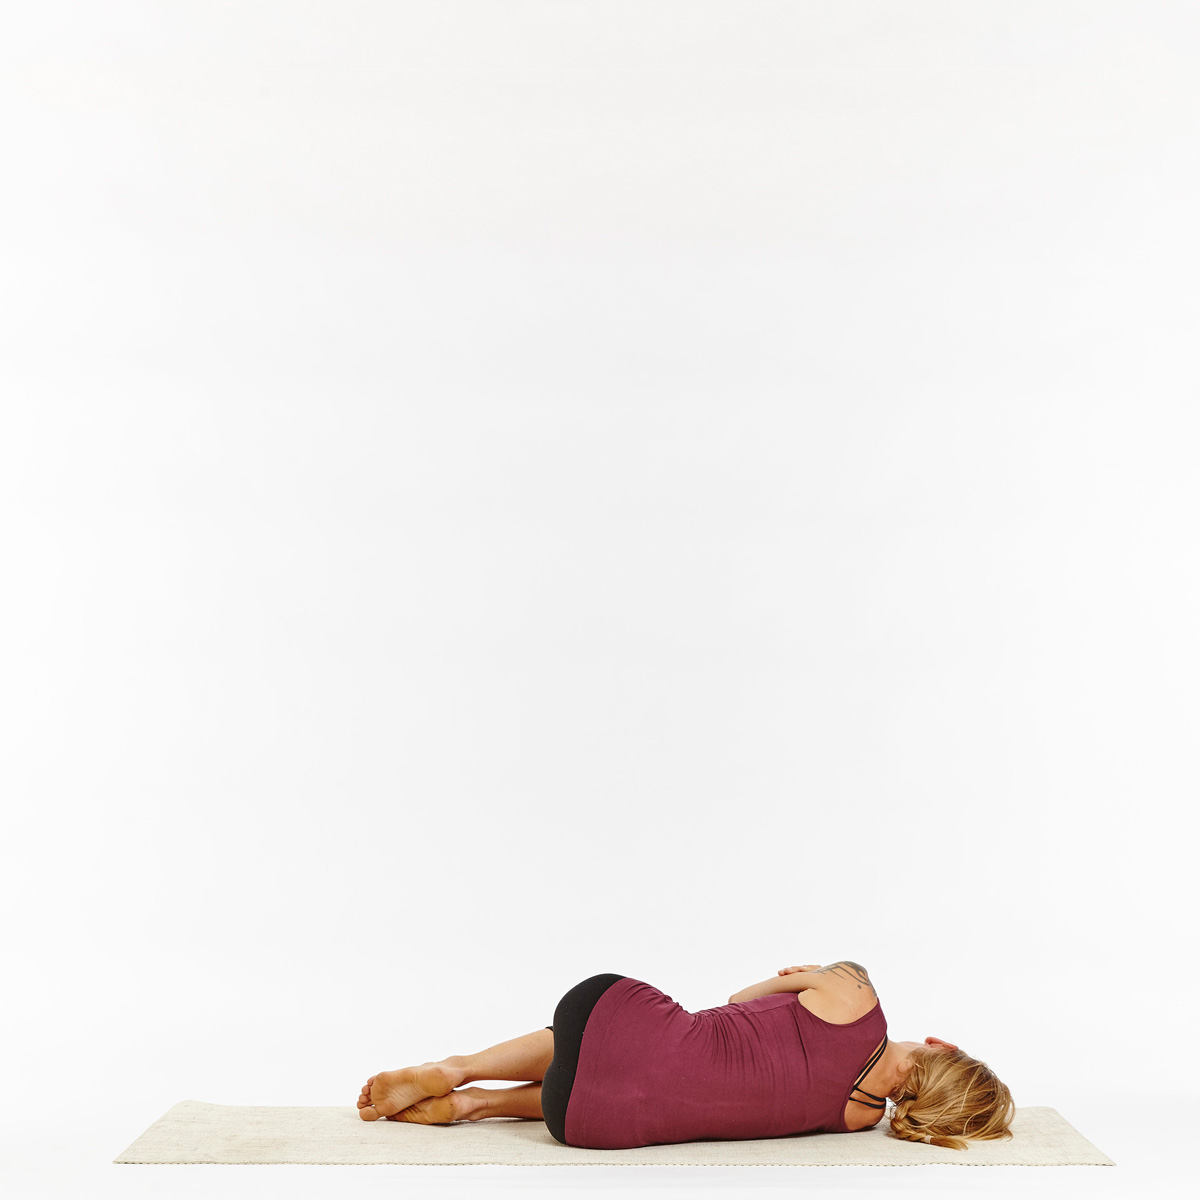 Premium Photo | Young woman lying in a rest position shavasana on the floor